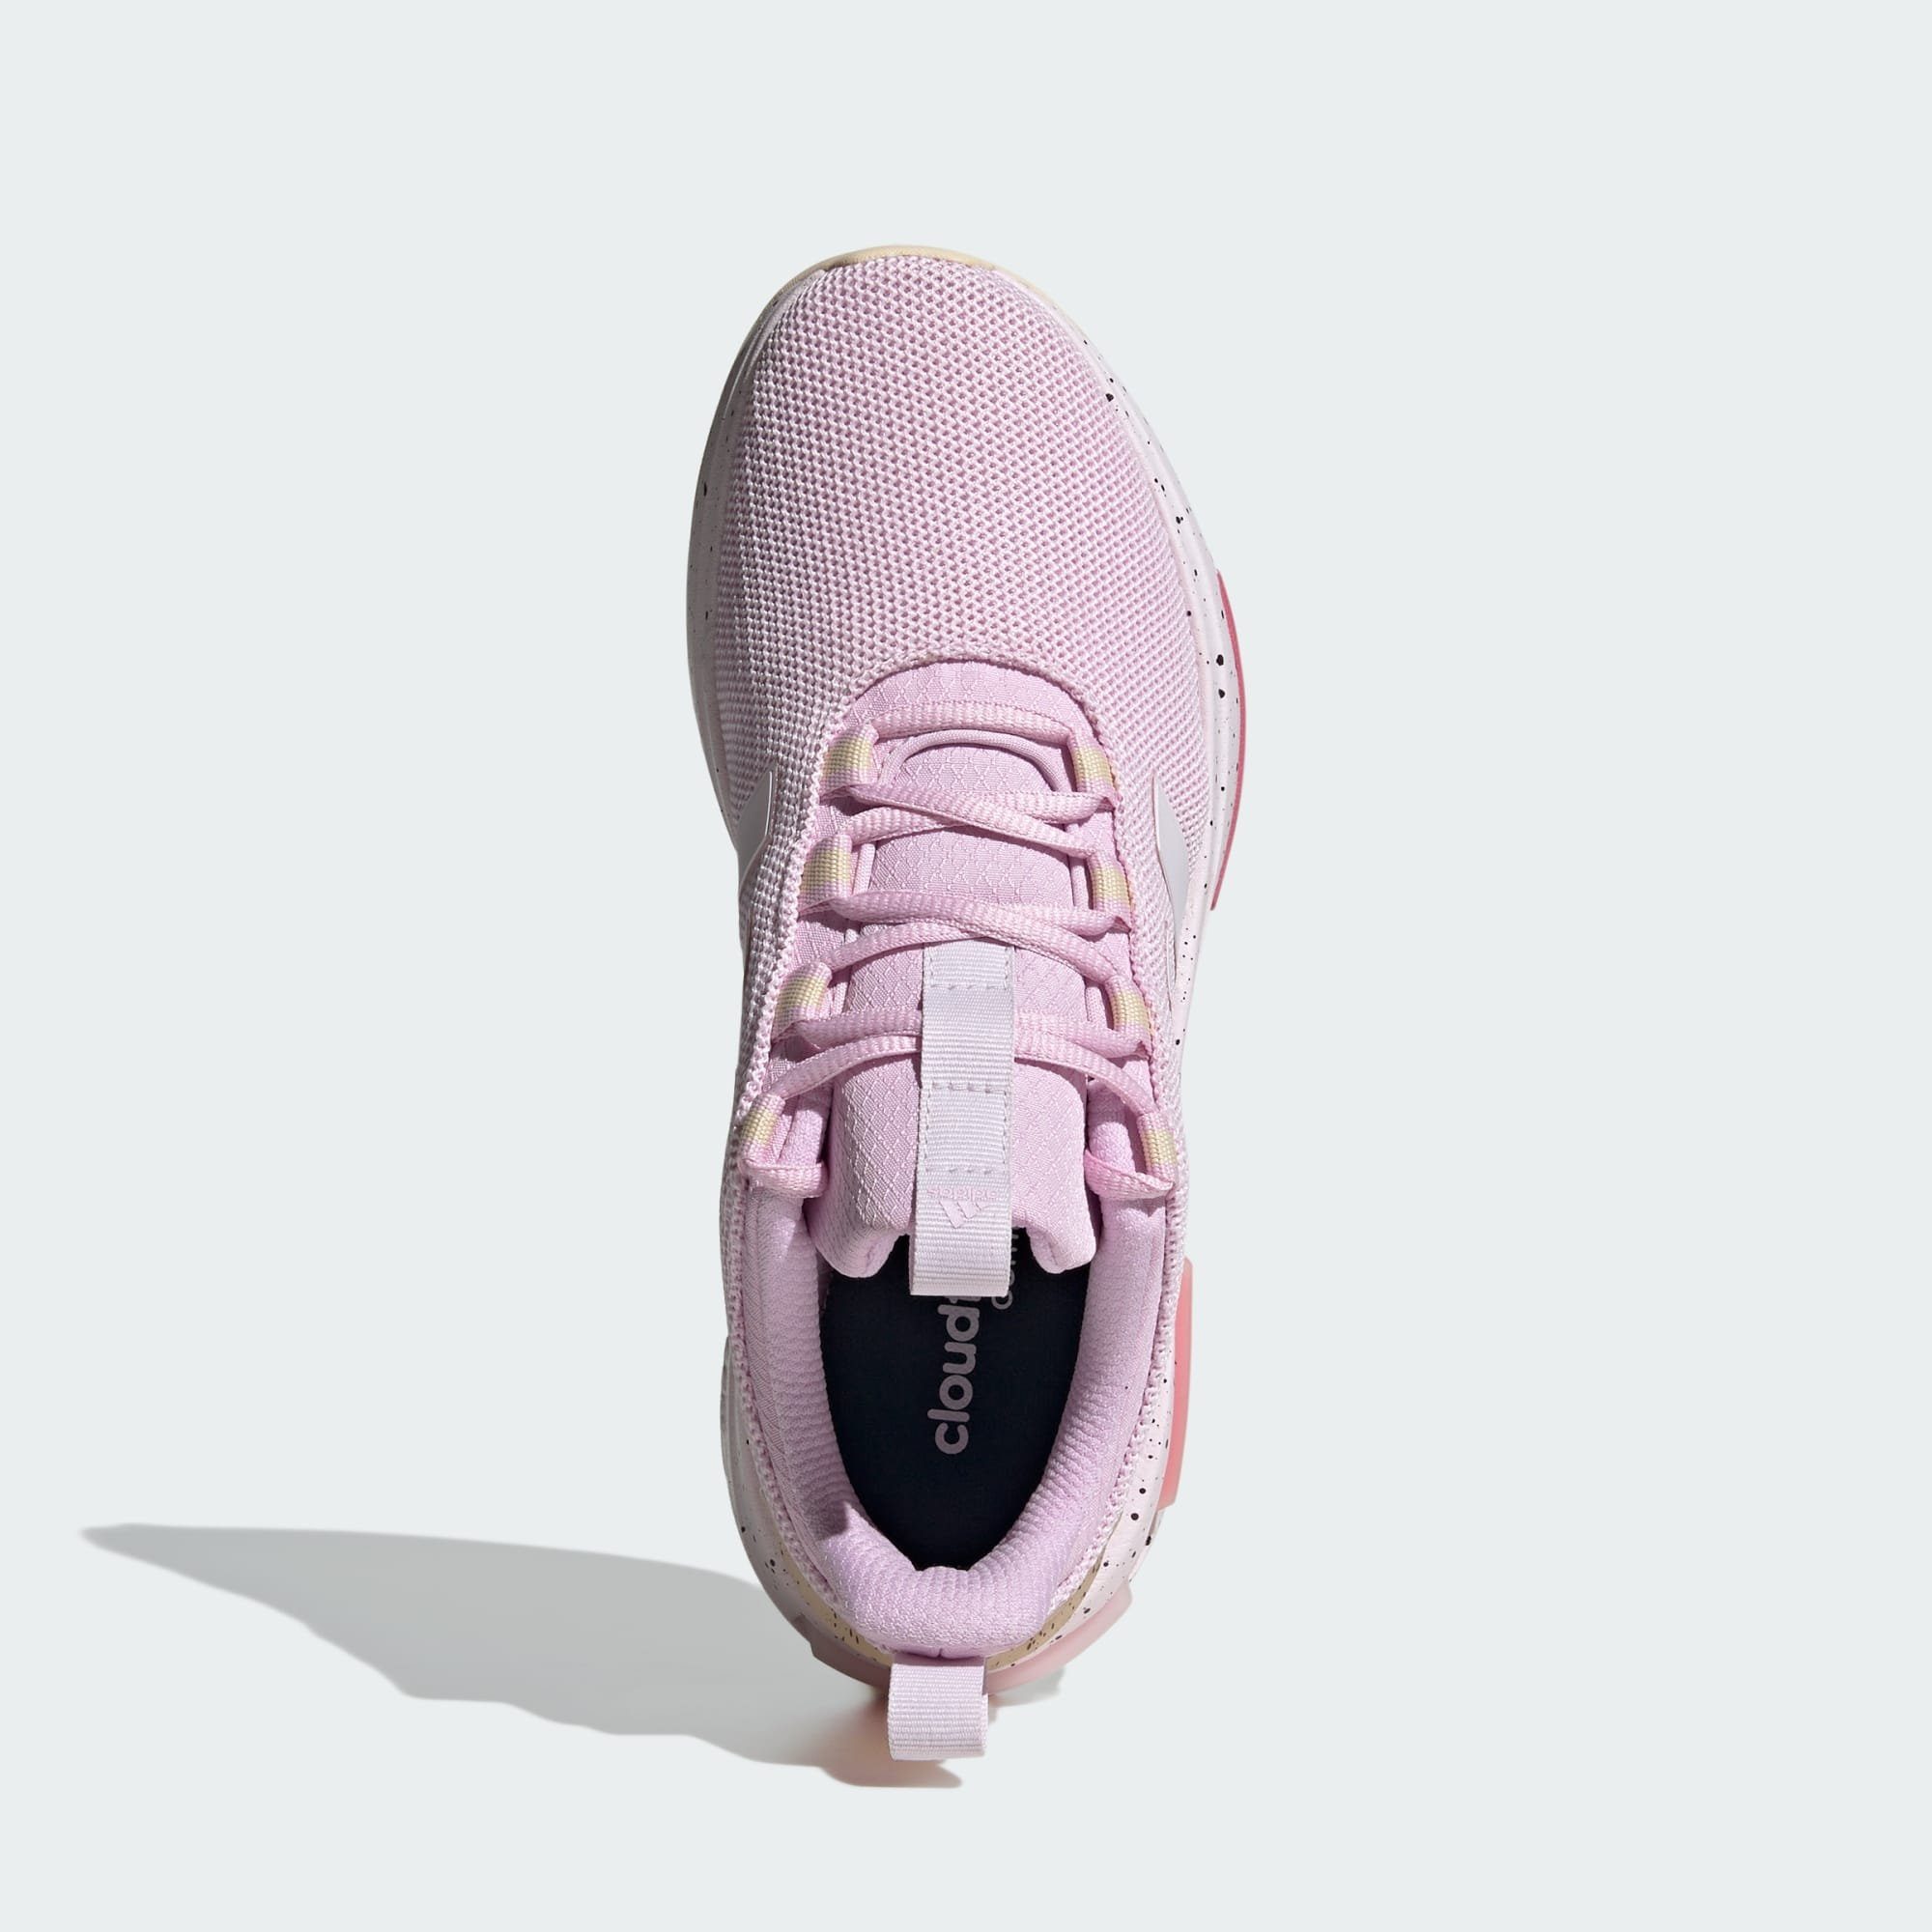 Fusion Sportswear / TR23 Pink Almost Orchid RACER / Fusion Pink Sneaker adidas SCHUH